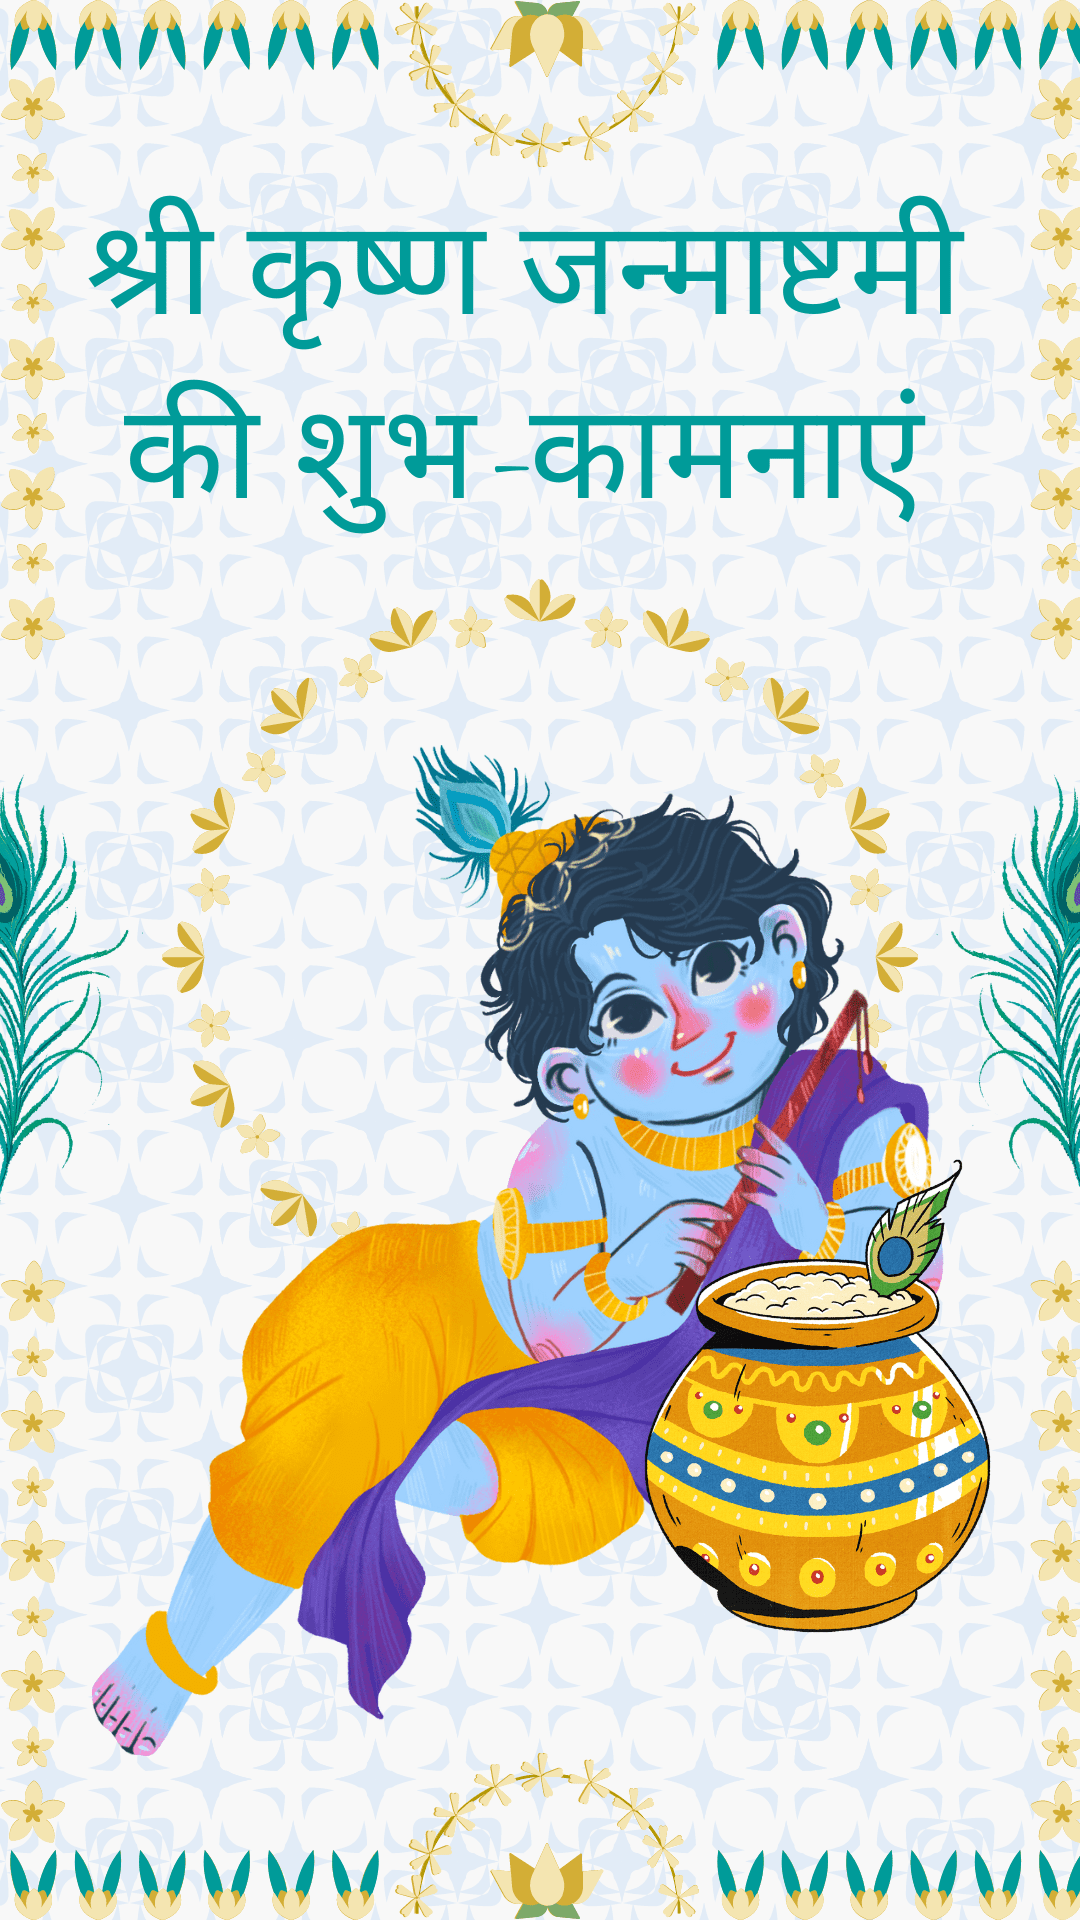 #{"id":1619,"_id":"61f3f785e0f744570541c3c4","name":"krishna-janmashtami","count":1,"data":"{\"_id\":{\"$oid\":\"61f3f785e0f744570541c3c4\"},\"id\":\"891\",\"name\":\"krishna-janmashtami\",\"created_at\":\"2021-08-26-13:32:36\",\"updated_at\":\"2021-08-26-13:32:36\",\"updatedAt\":{\"$date\":\"2022-01-28T14:33:44.933Z\"},\"count\":1}","deleted_at":null,"created_at":"2021-08-26T01:32:36.000000Z","updated_at":"2021-08-26T01:32:36.000000Z","merge_with":null,"pivot":{"taggable_id":2310,"tag_id":1619,"taggable_type":"App\\Models\\Status"}}, #{"id":2479,"_id":null,"name":"happy-krishna-janmahtami-status","count":0,"data":null,"deleted_at":null,"created_at":"2023-09-04T09:00:26.000000Z","updated_at":"2023-09-04T09:00:26.000000Z","merge_with":null,"pivot":{"taggable_id":2310,"tag_id":2479,"taggable_type":"App\\Models\\Status"}}, #{"id":2480,"_id":null,"name":"janmashtami-hindi-quotes","count":0,"data":null,"deleted_at":null,"created_at":"2023-09-04T09:00:26.000000Z","updated_at":"2023-09-04T09:00:26.000000Z","merge_with":null,"pivot":{"taggable_id":2310,"tag_id":2480,"taggable_type":"App\\Models\\Status"}}, #{"id":2482,"_id":null,"name":"krishna-janmashtami-hindi-status","count":0,"data":null,"deleted_at":null,"created_at":"2023-09-04T09:00:26.000000Z","updated_at":"2023-09-04T09:00:26.000000Z","merge_with":null,"pivot":{"taggable_id":2310,"tag_id":2482,"taggable_type":"App\\Models\\Status"}}, #{"id":1609,"_id":"61f3f785e0f744570541c3ba","name":"janmashtami-status-in-hindi","count":19,"data":"{\"_id\":{\"$oid\":\"61f3f785e0f744570541c3ba\"},\"id\":\"881\",\"name\":\"janmashtami-status-in-hindi\",\"created_at\":\"2021-08-26-13:19:45\",\"updated_at\":\"2021-08-26-13:19:45\",\"updatedAt\":{\"$date\":\"2022-01-28T14:33:44.933Z\"},\"count\":19}","deleted_at":null,"created_at":"2021-08-26T01:19:45.000000Z","updated_at":"2021-08-26T01:19:45.000000Z","merge_with":null,"pivot":{"taggable_id":2310,"tag_id":1609,"taggable_type":"App\\Models\\Status"}}